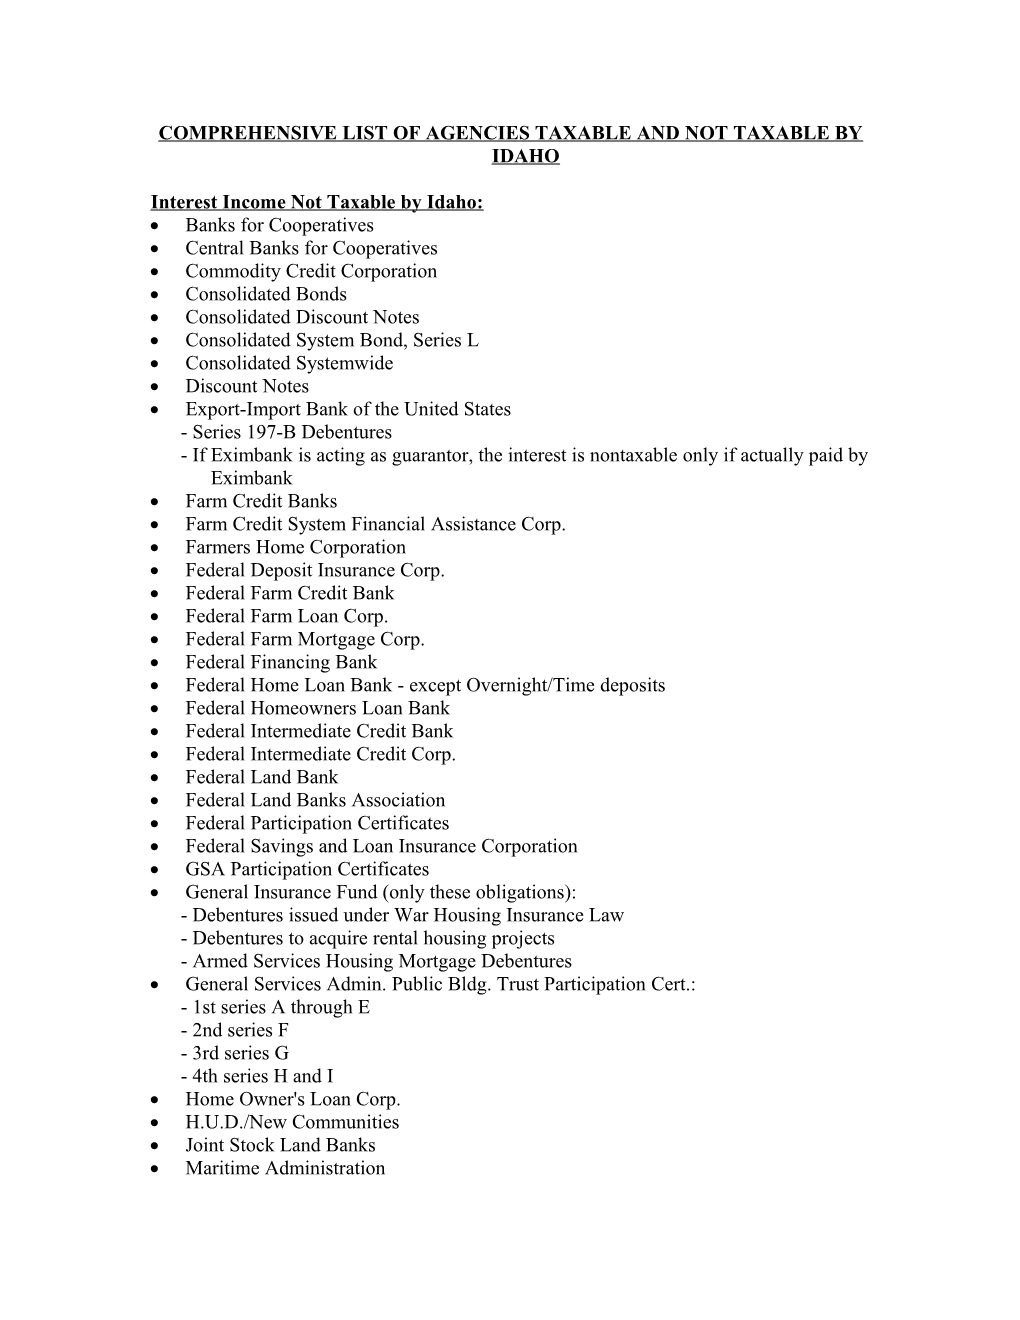 Comprehensive List of Agencies Taxable and Not Taxable by Idaho